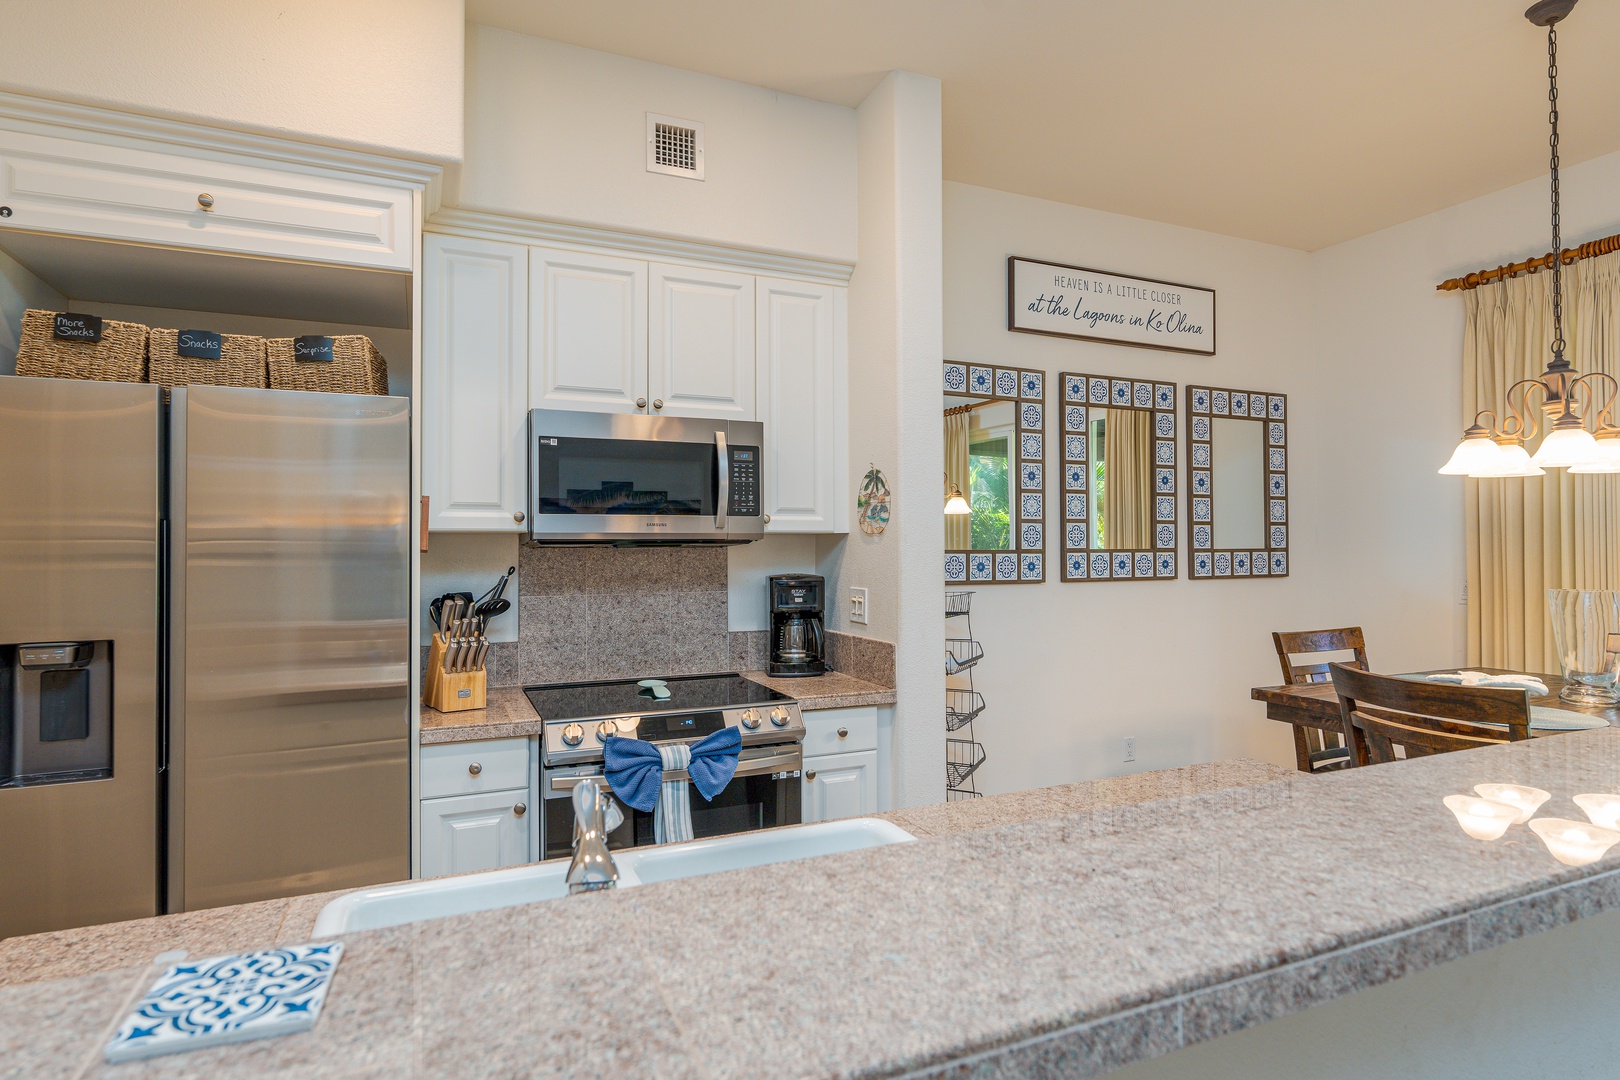 Kapolei Vacation Rentals, Coconut Plantation 1208-2 - The kitchen is equipped with stainless steel appliances for your culinary adventures.